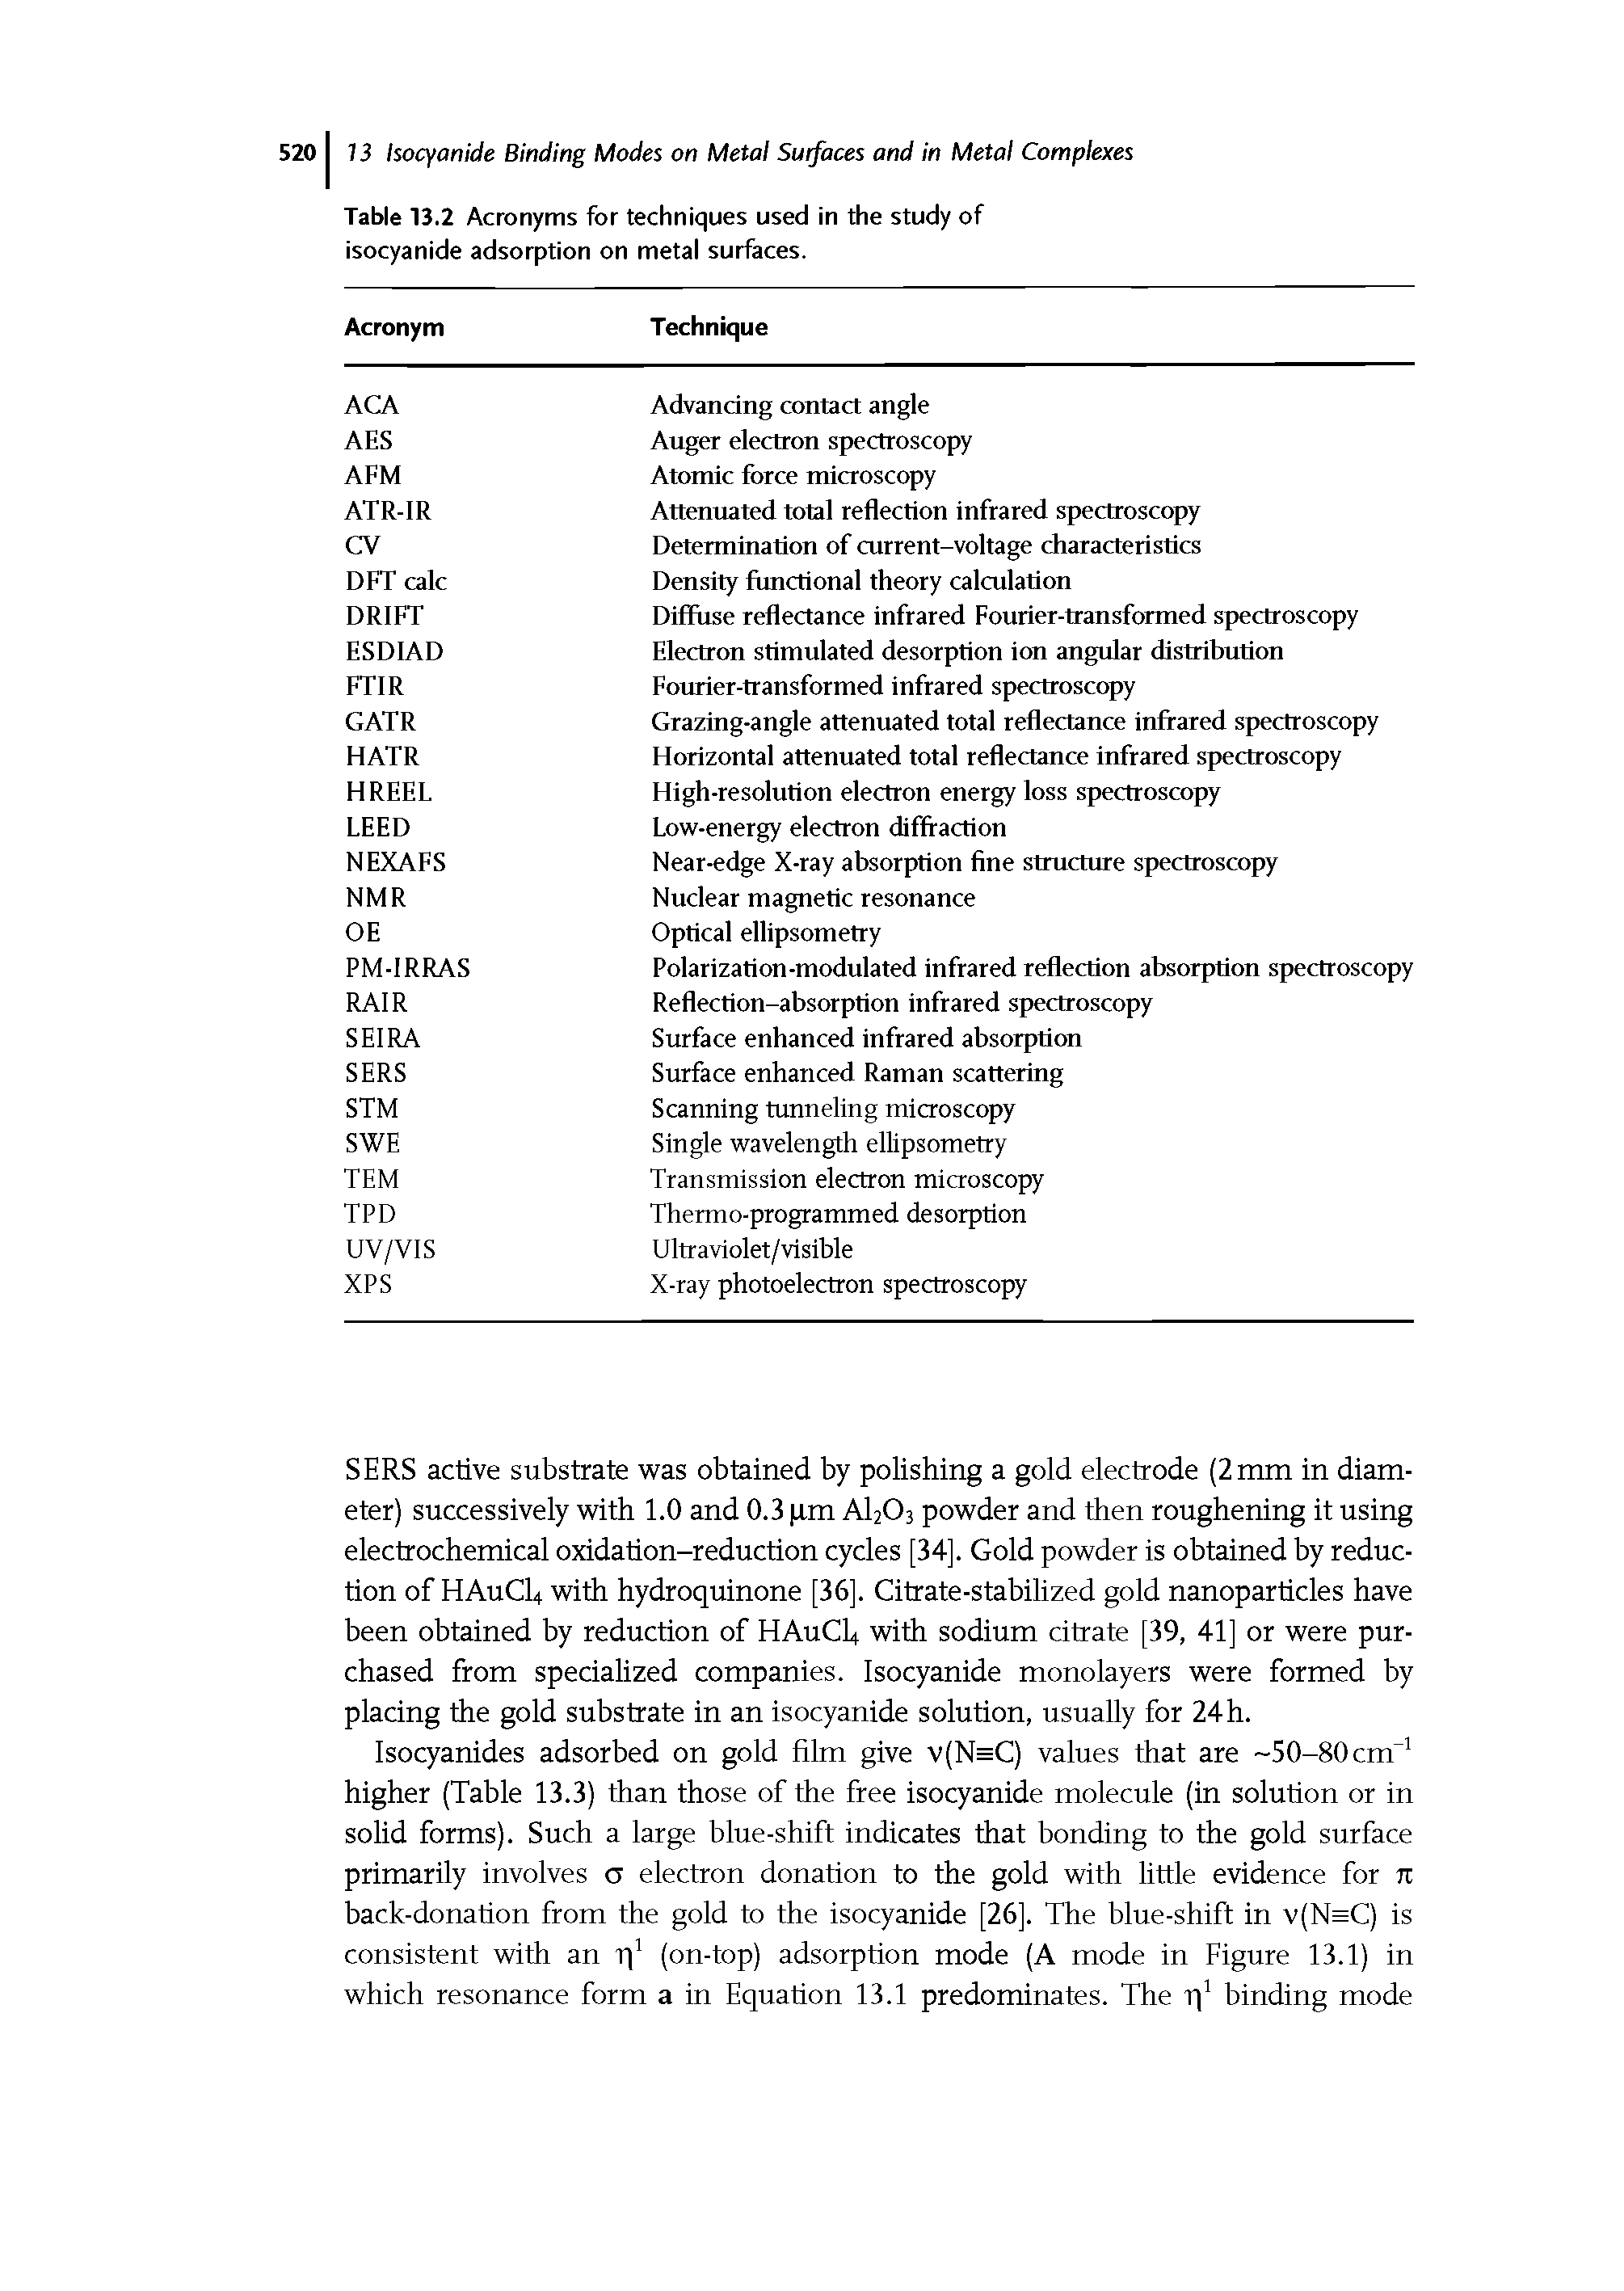 Table 13.2 Acronyms for techniques used in the study of isocyanide adsorption on metal surfaces.